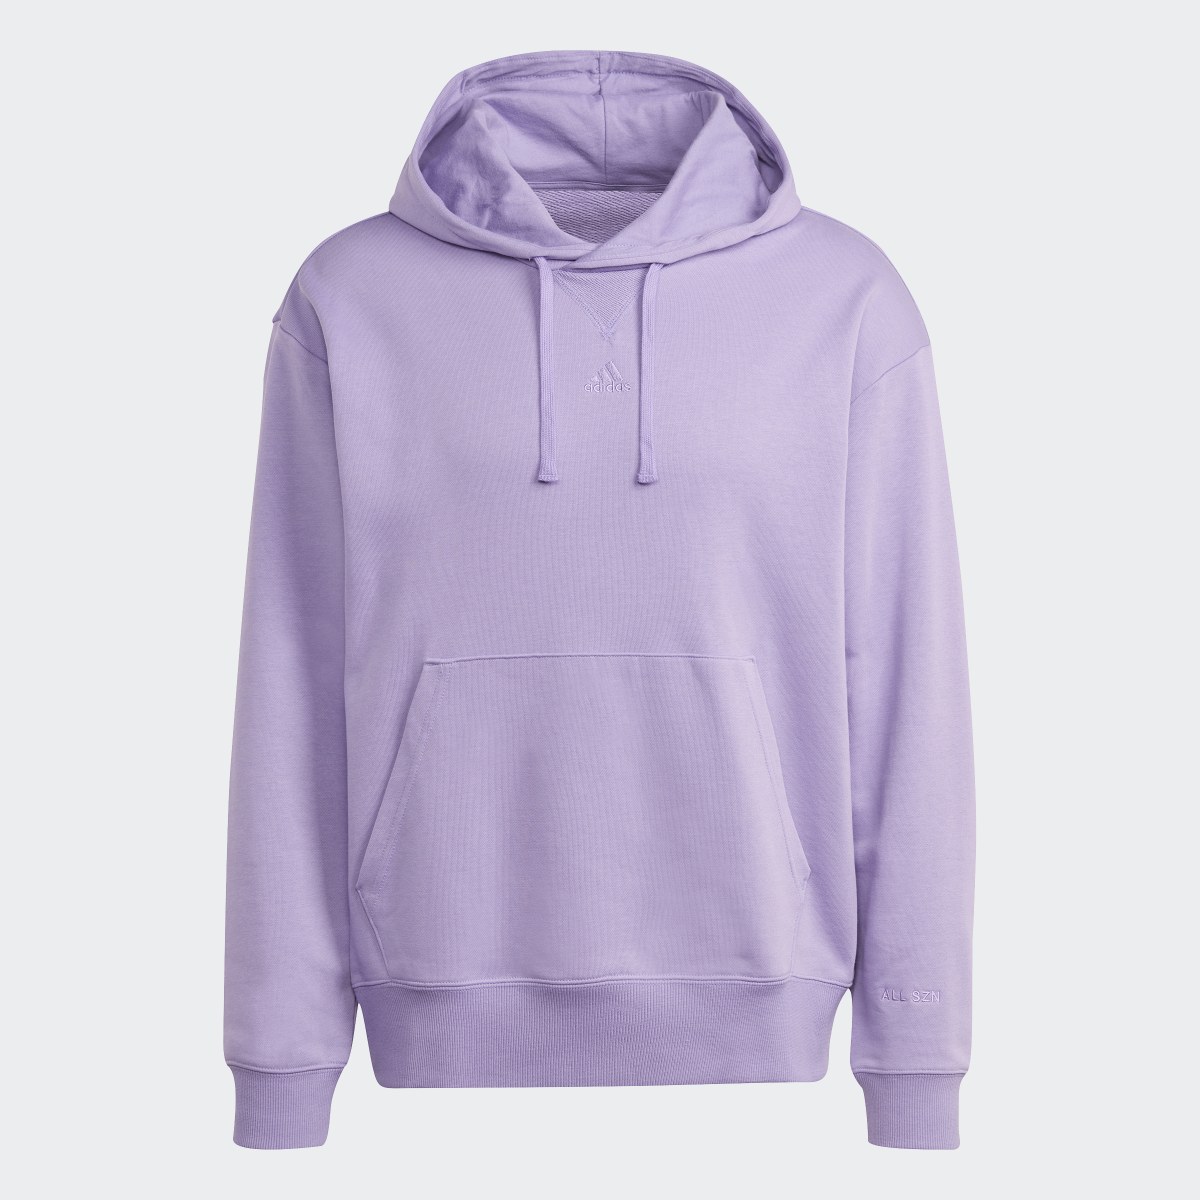 Adidas ALL SZN French Terry Hoodie. 5